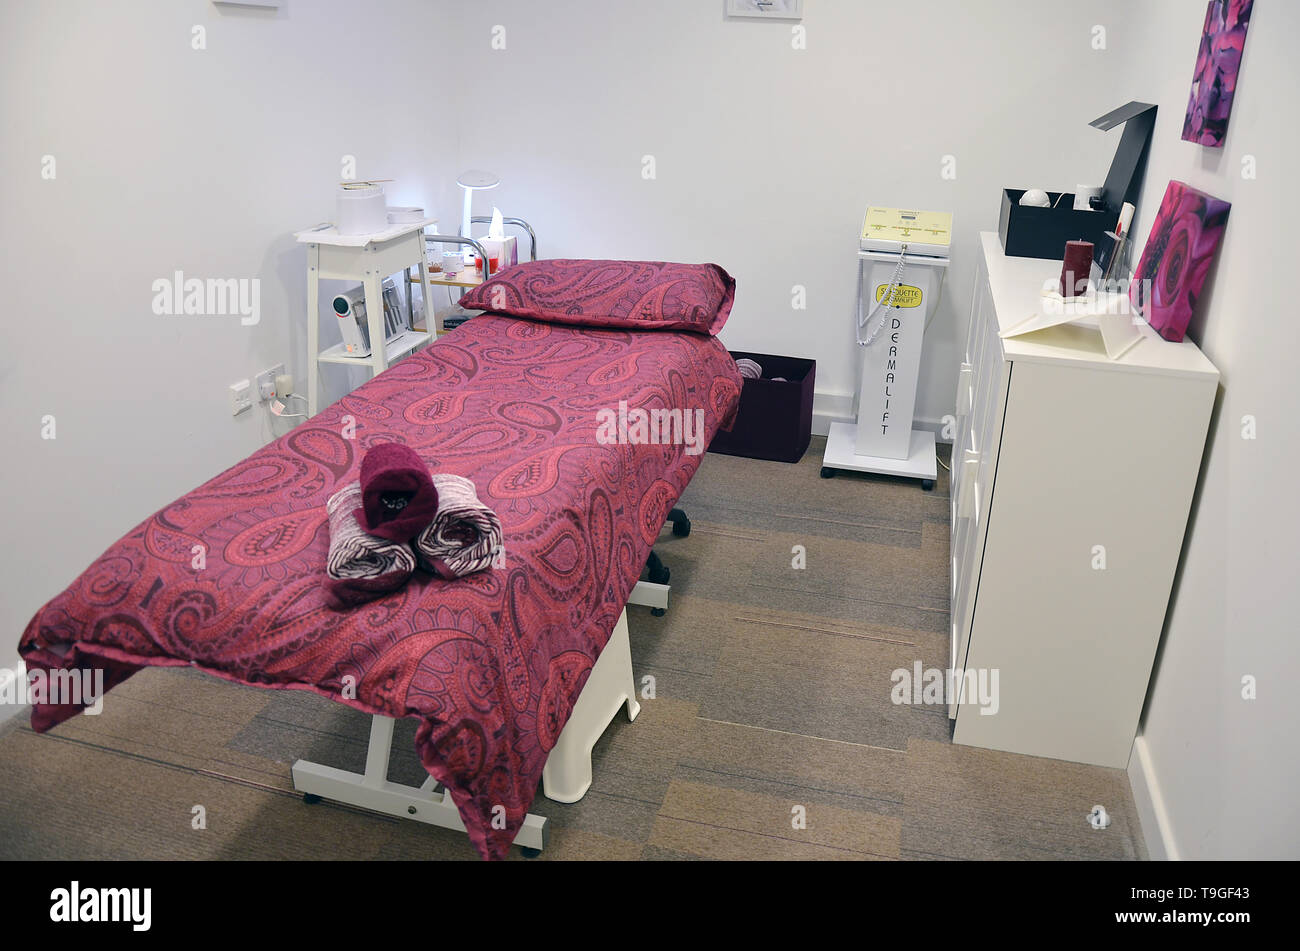 beauty therapy treatment rooms Stock Photo